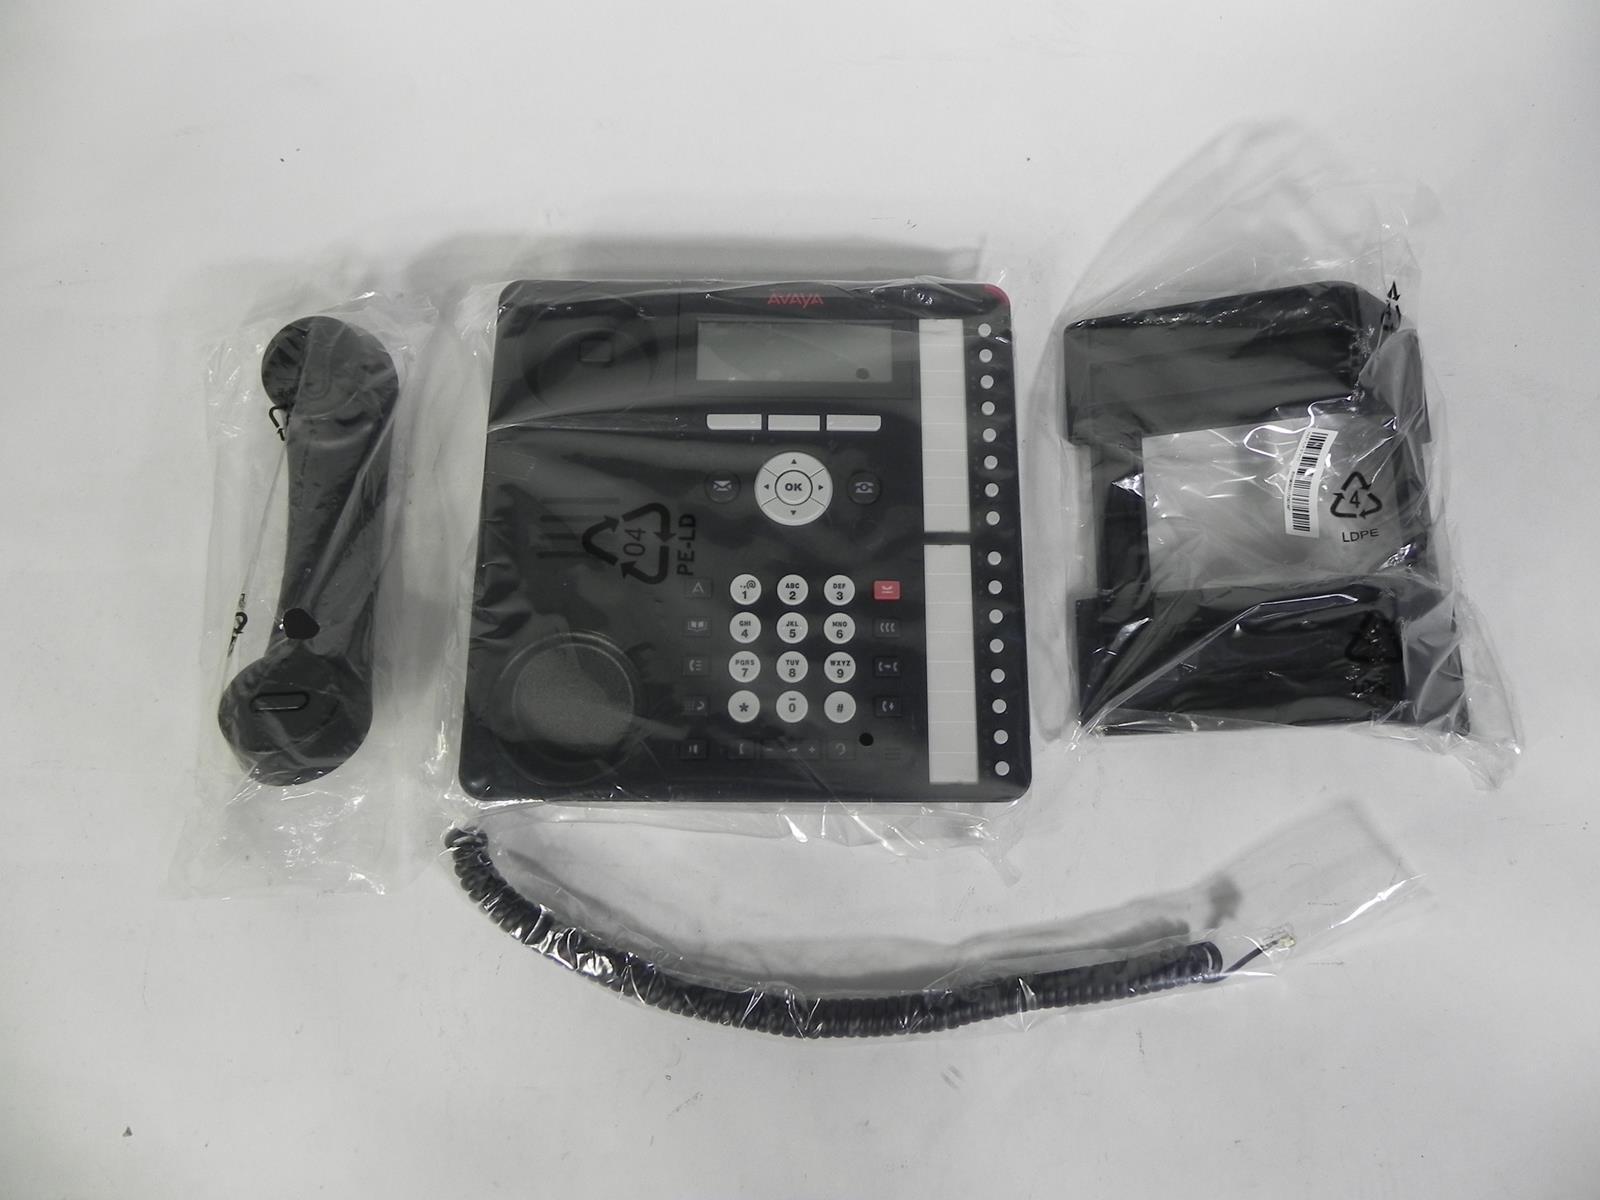 Avaya 1616-I VoIP Office Phone w/ Stand, Handset, Cables - NEW